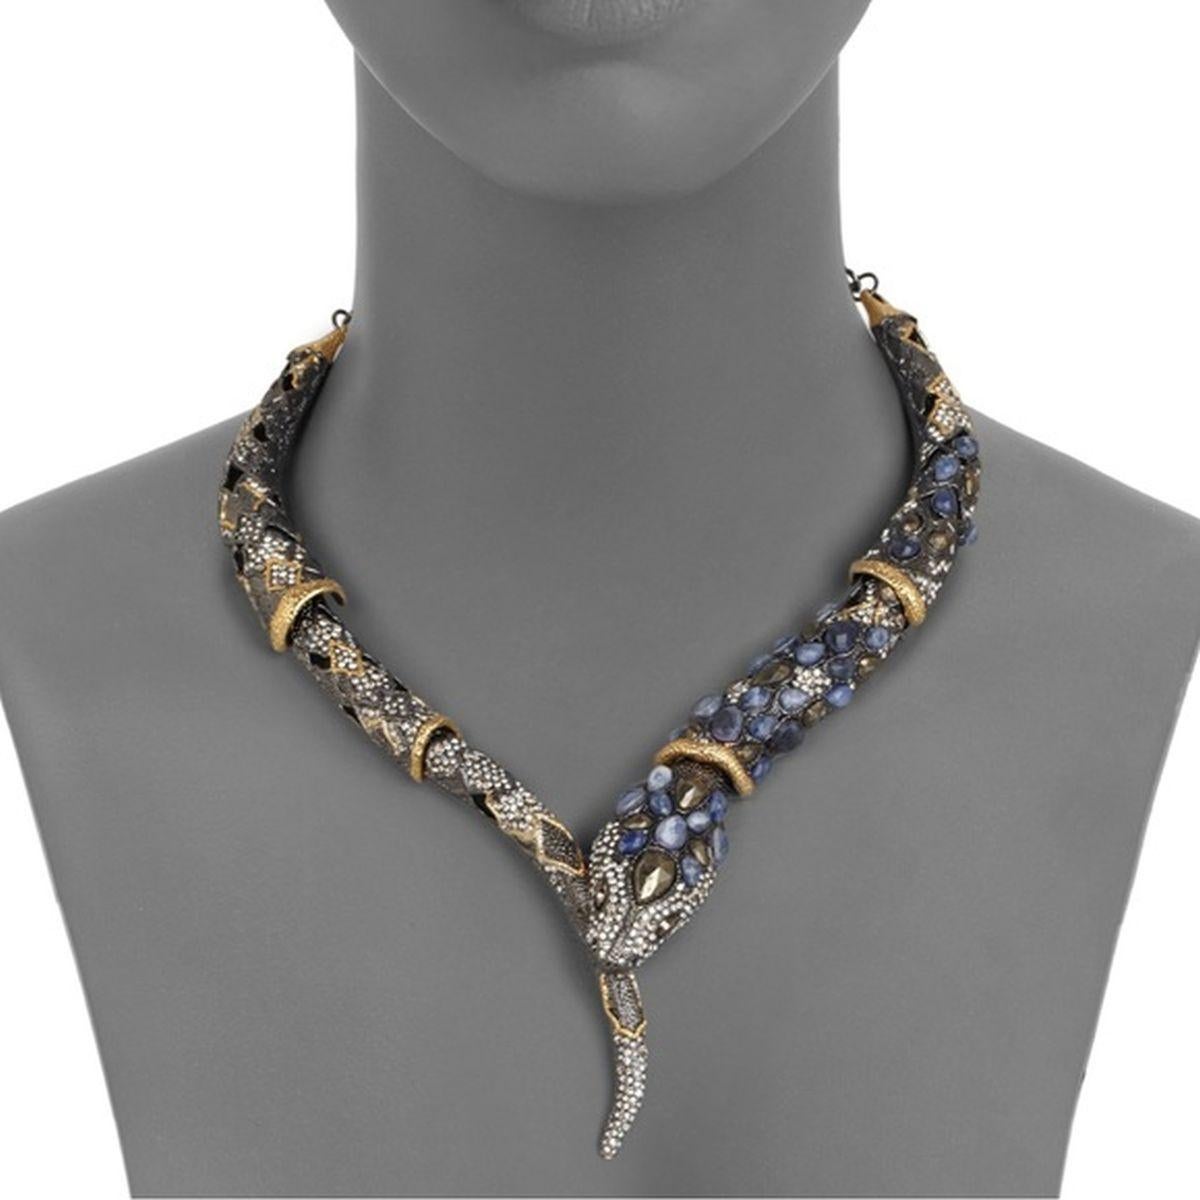 Simply Fabulous! Show Stopper Exotic Jardin de Papillon Viper Snake Serpent Red Carpet Statement Necklace by Alexis Bittar.  Encrusted with sparkling Teardrop Blue, Brown and round Crystals inter-spaced with gold gilt accents. Approx. 18